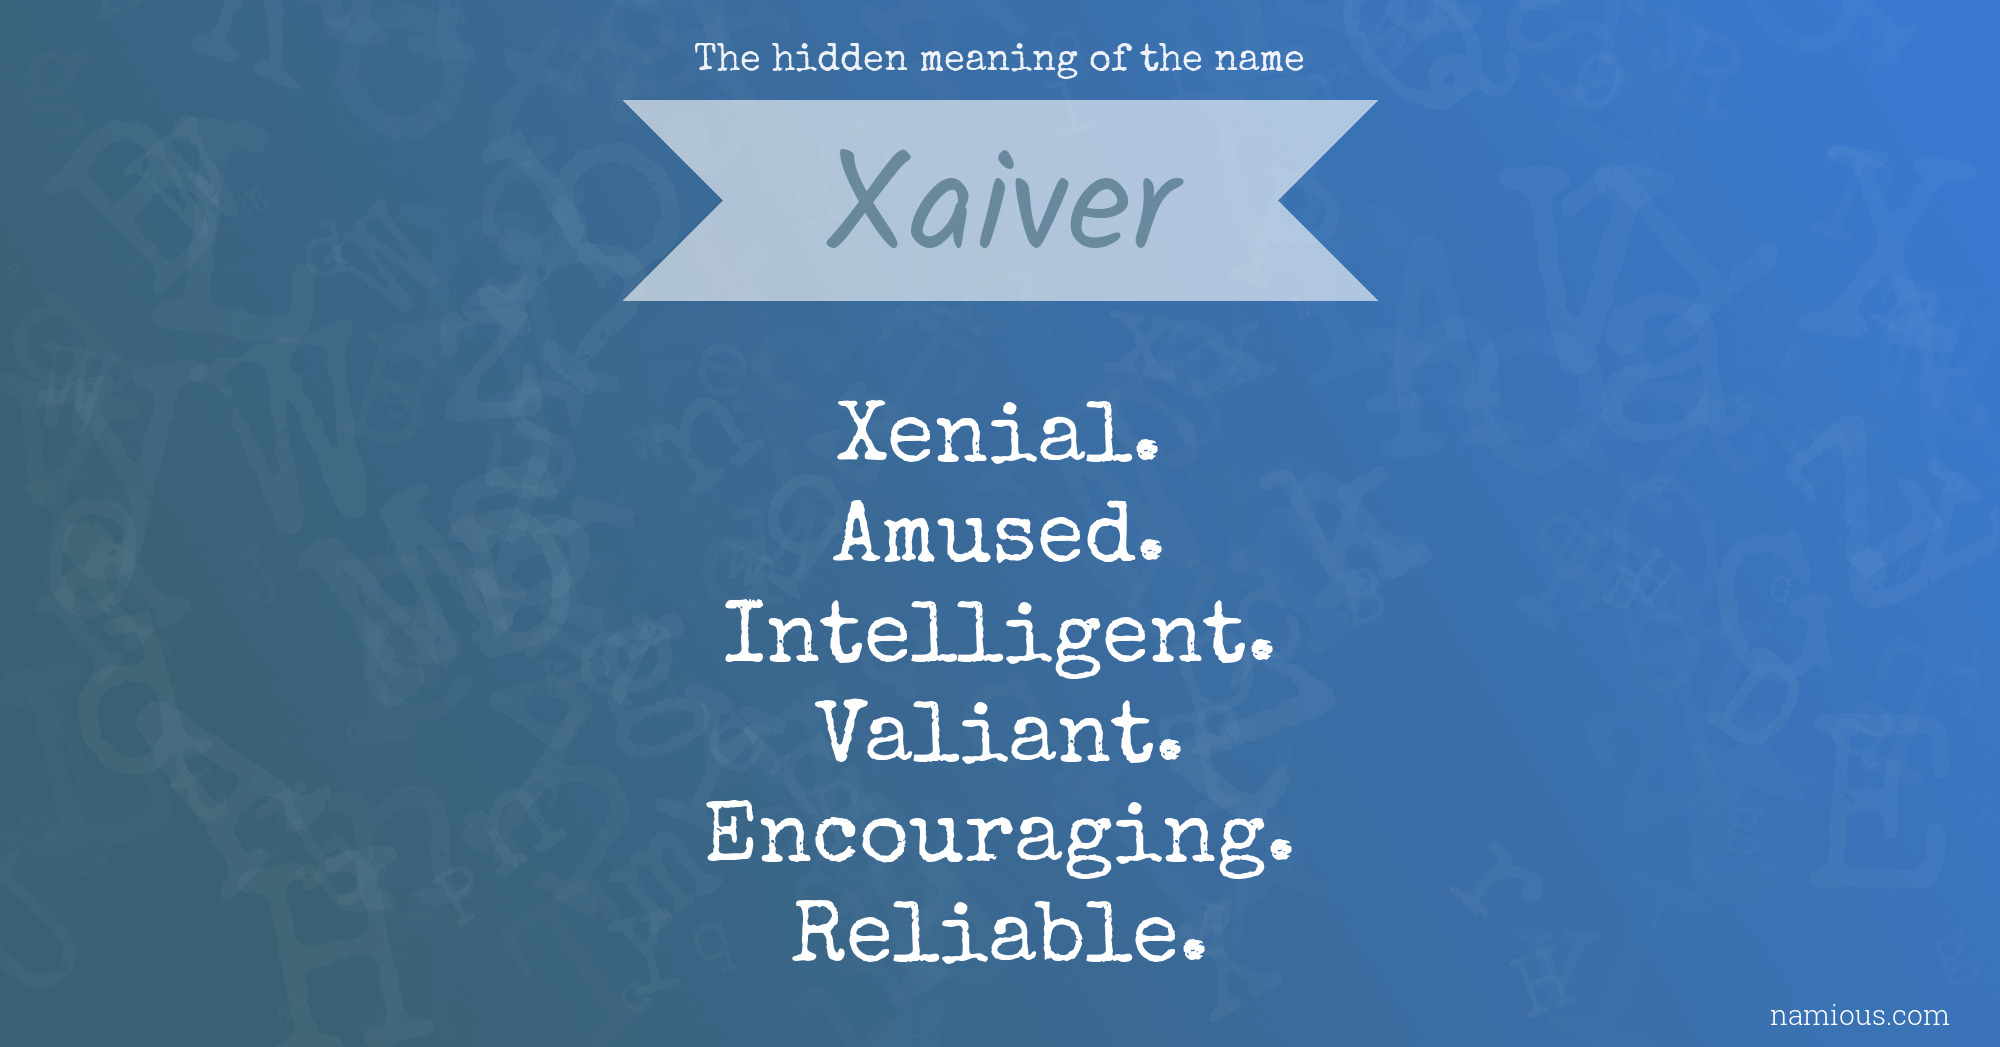 The hidden meaning of the name Xaiver